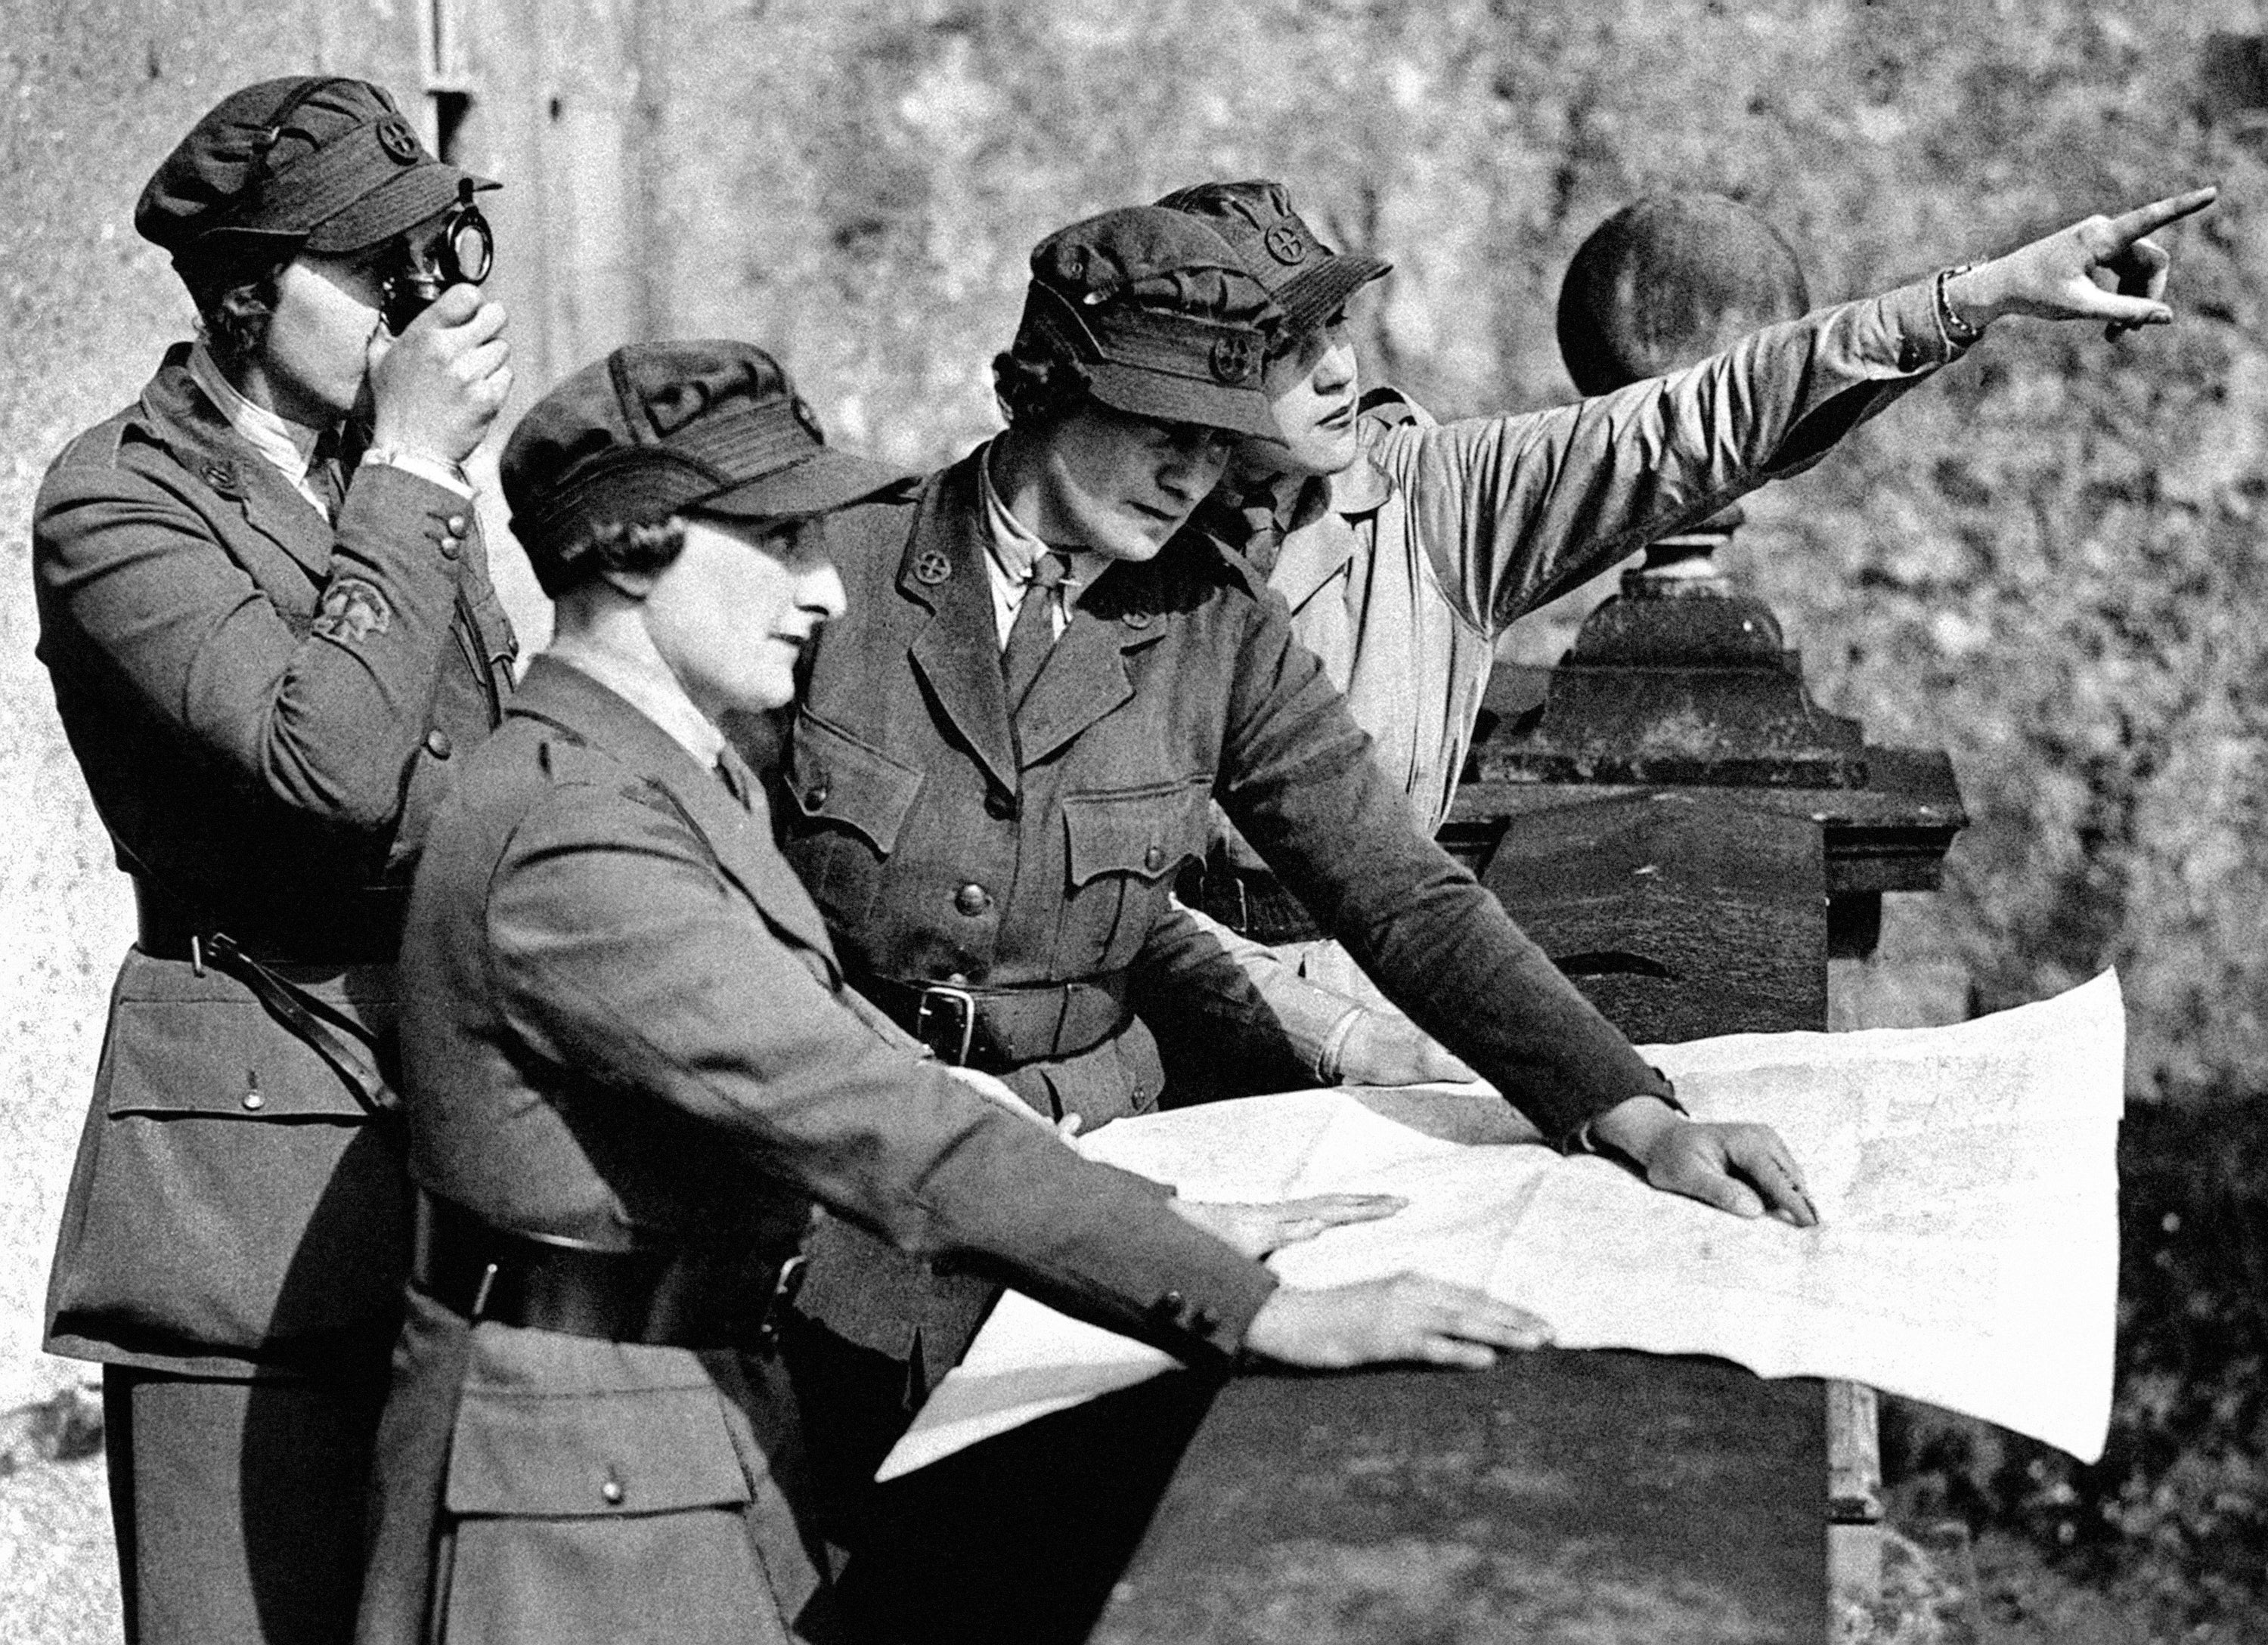 Members of the Women’s Transport Service (Northern Ireland Section) taking compass bearings from the terrace of Killyleagh Castle, County Down, Northern Ireland